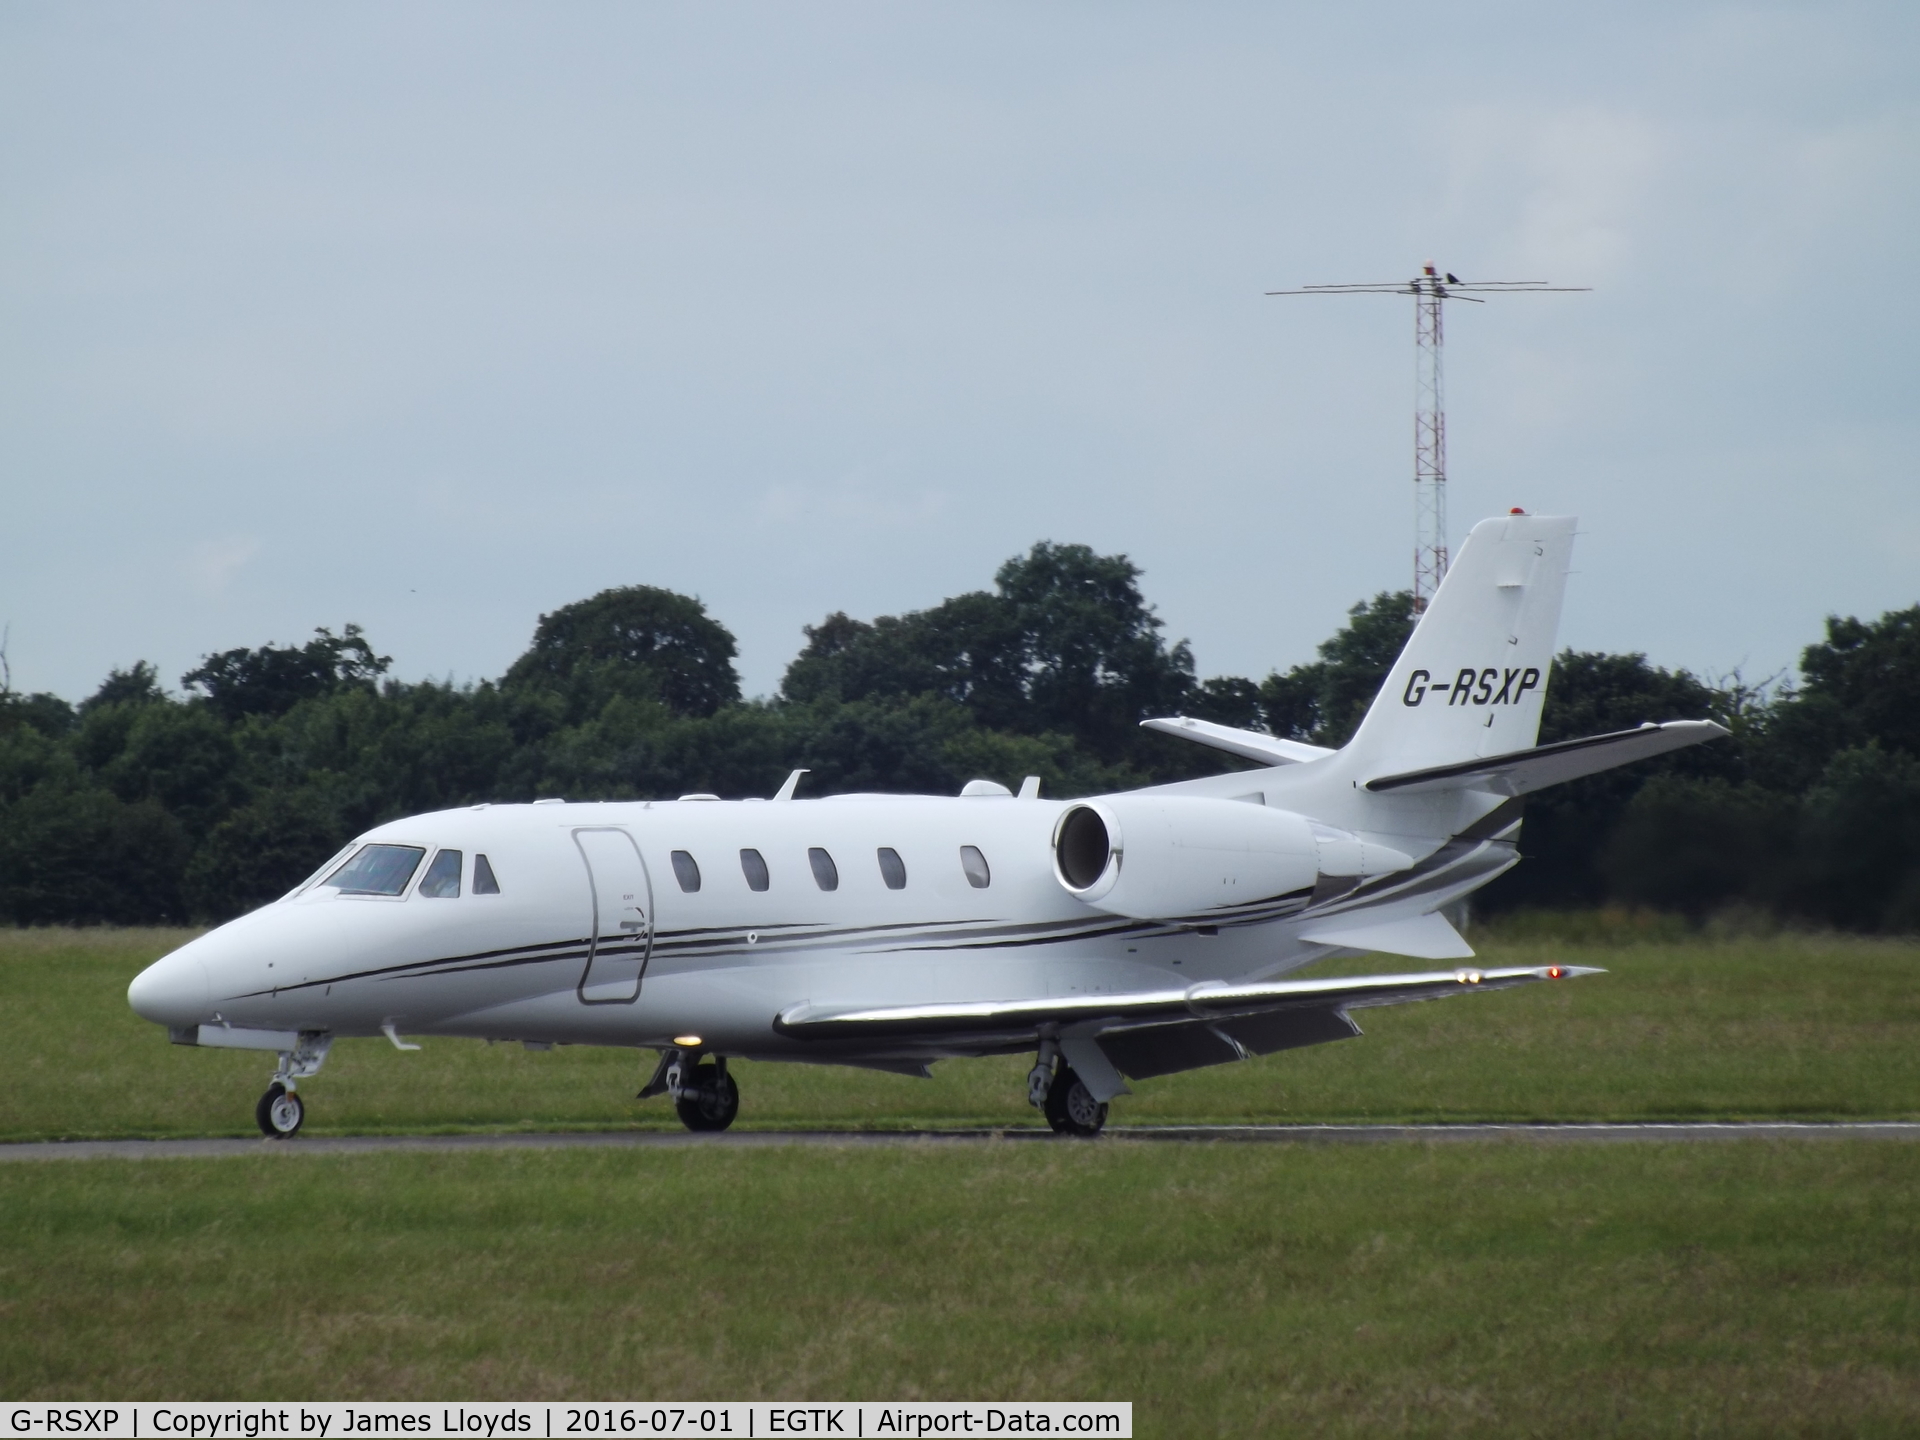 G-RSXP, 2015 Cessna 560XL Citation XLS C/N 560-6198, Taxing in at Oxford Airport.